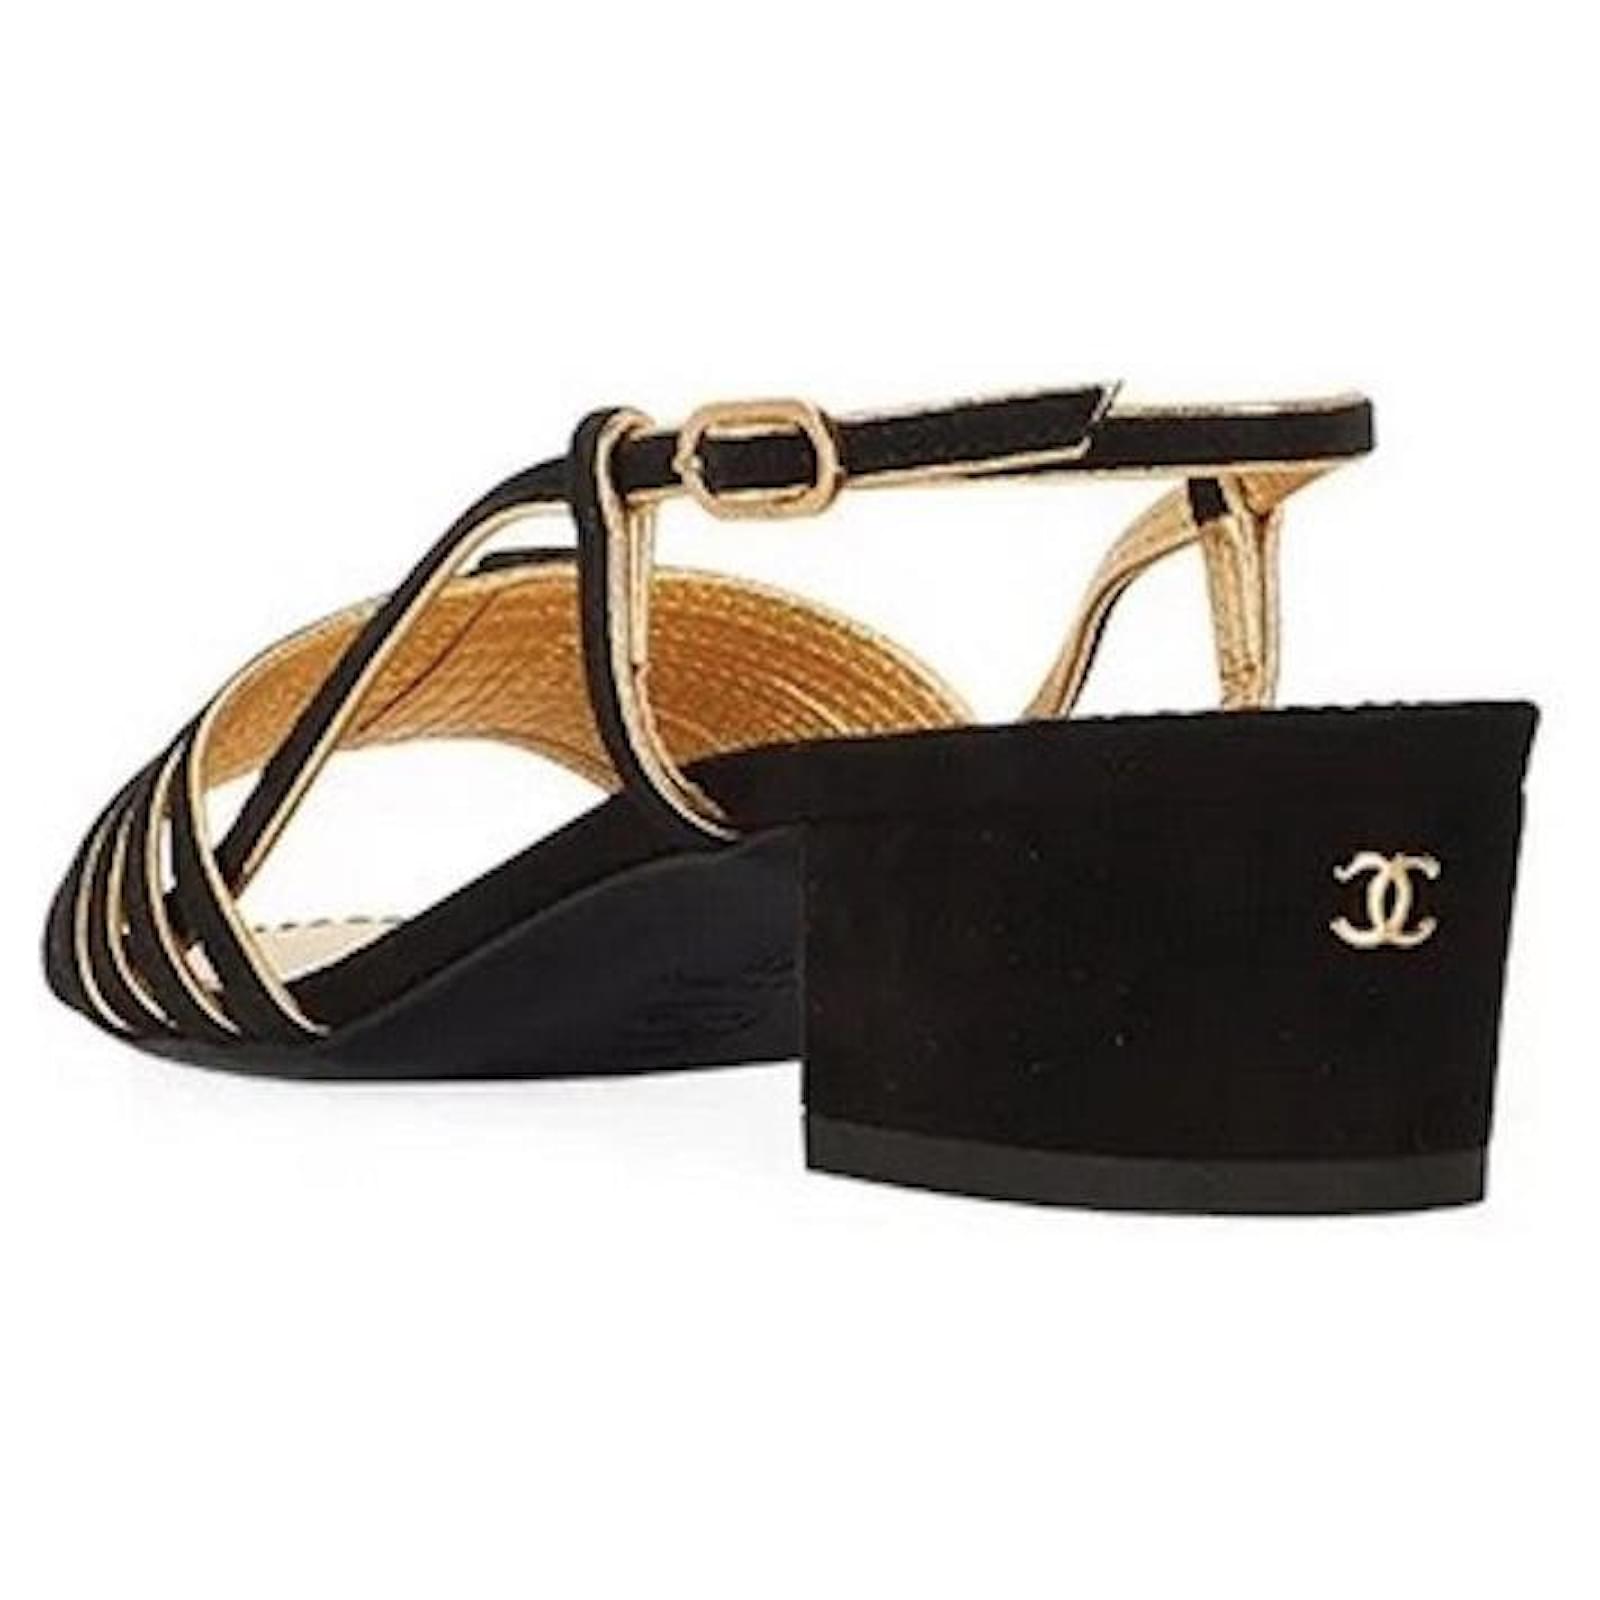 CHANEL Two-tone black and gold sandals T39 IT very good condition